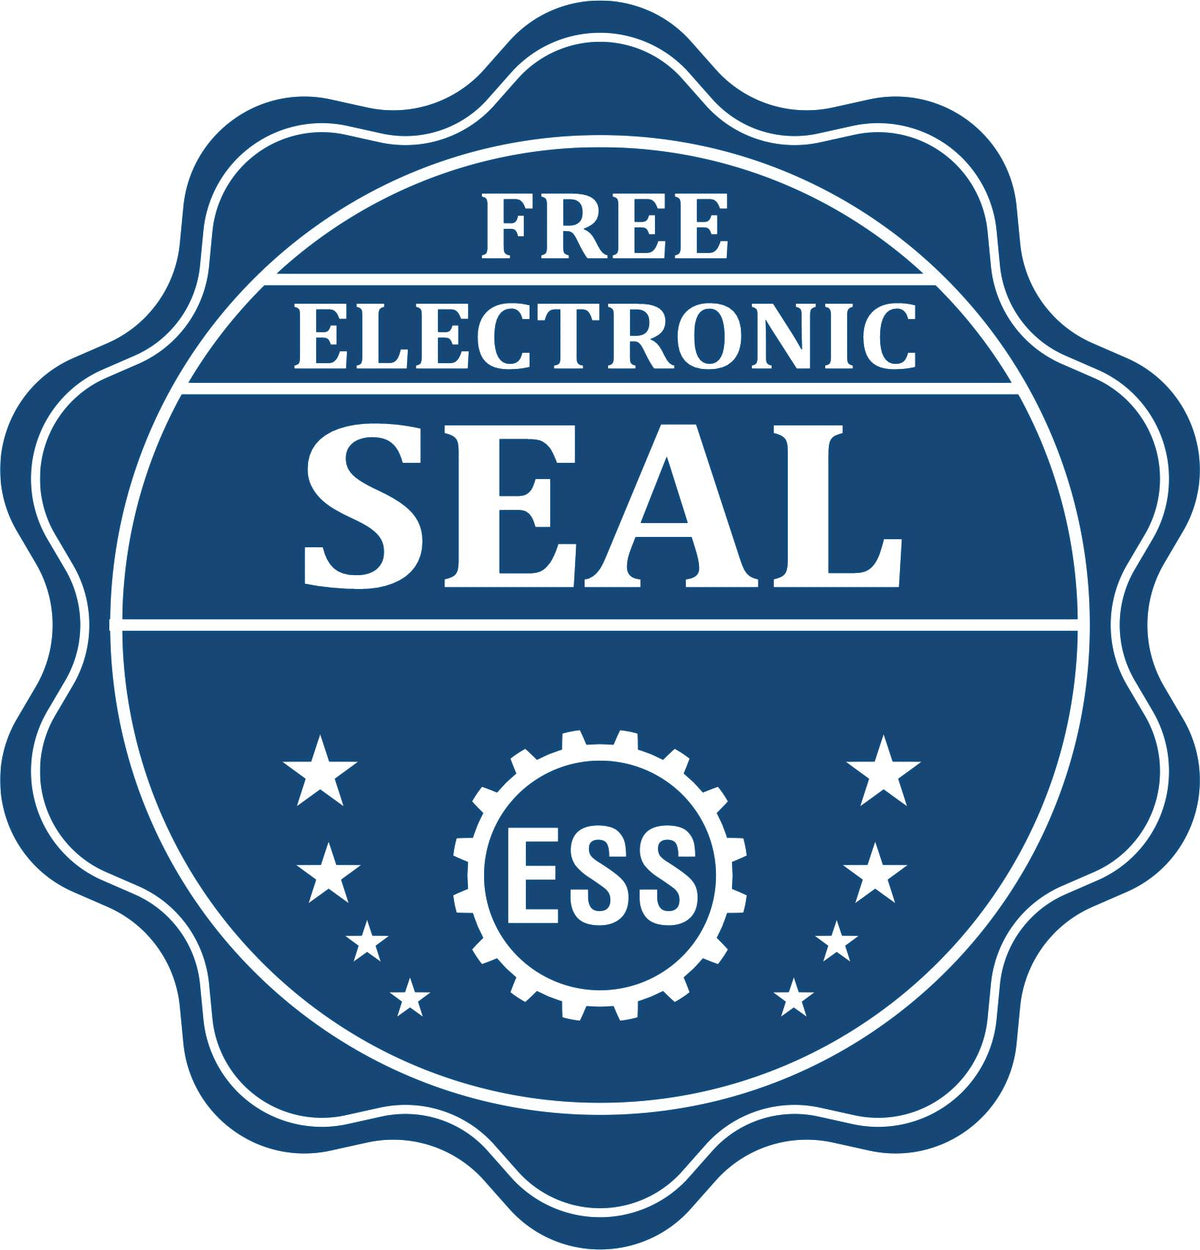 A badge showing a free electronic seal for the Gift Georgia Architect Seal with stars and the ESS gear on the emblem.